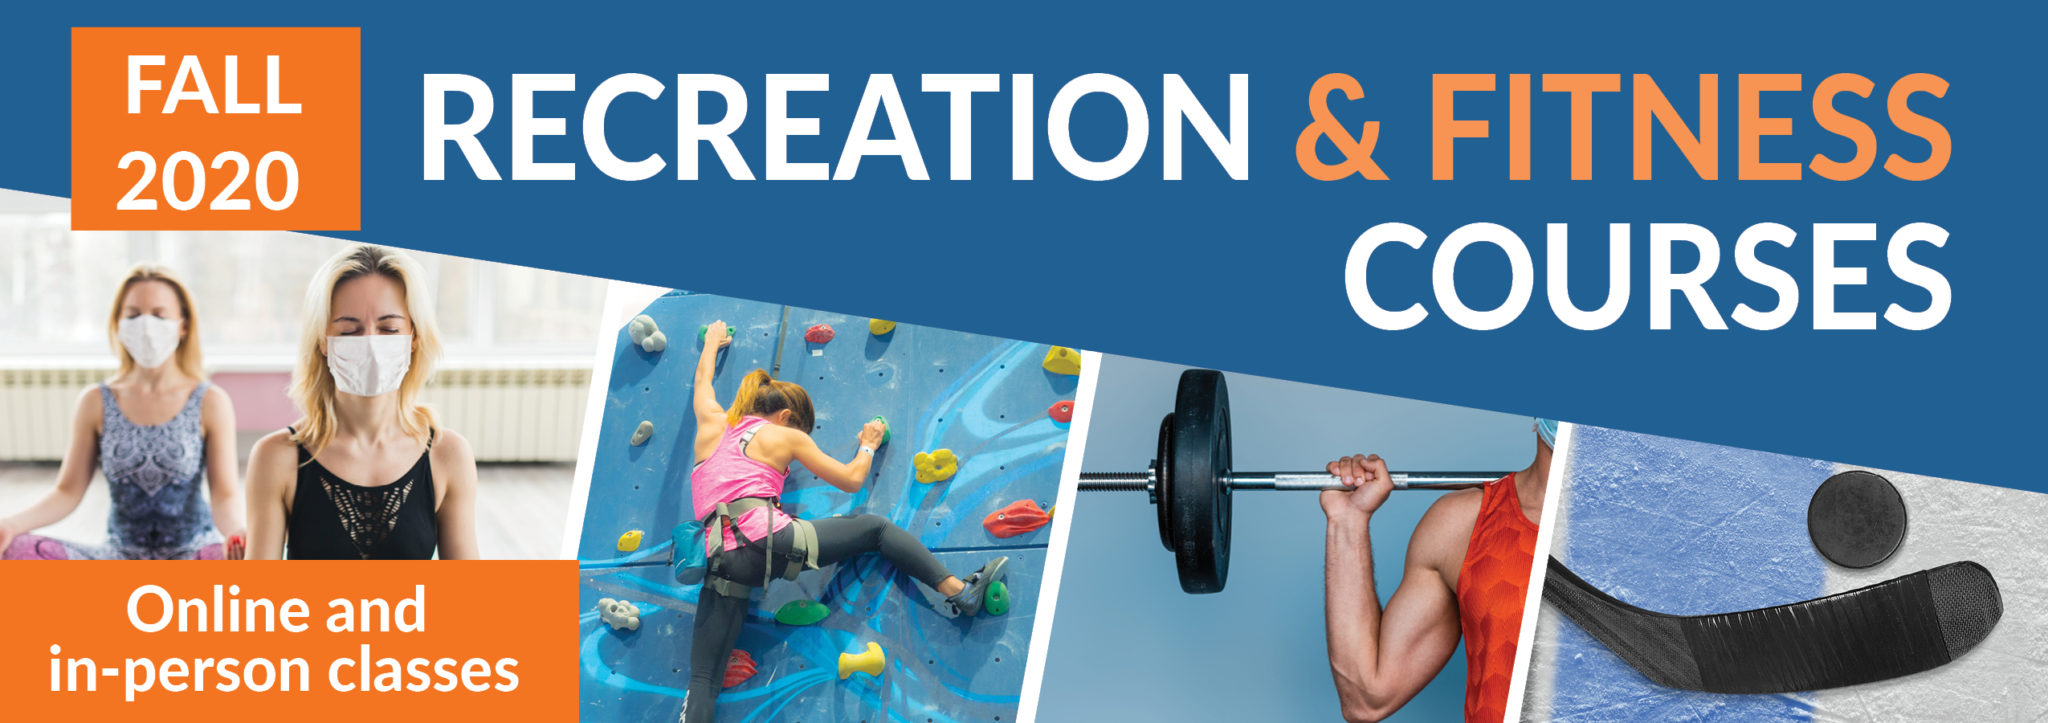 Fall 2020 Recreation and Fitness Courses